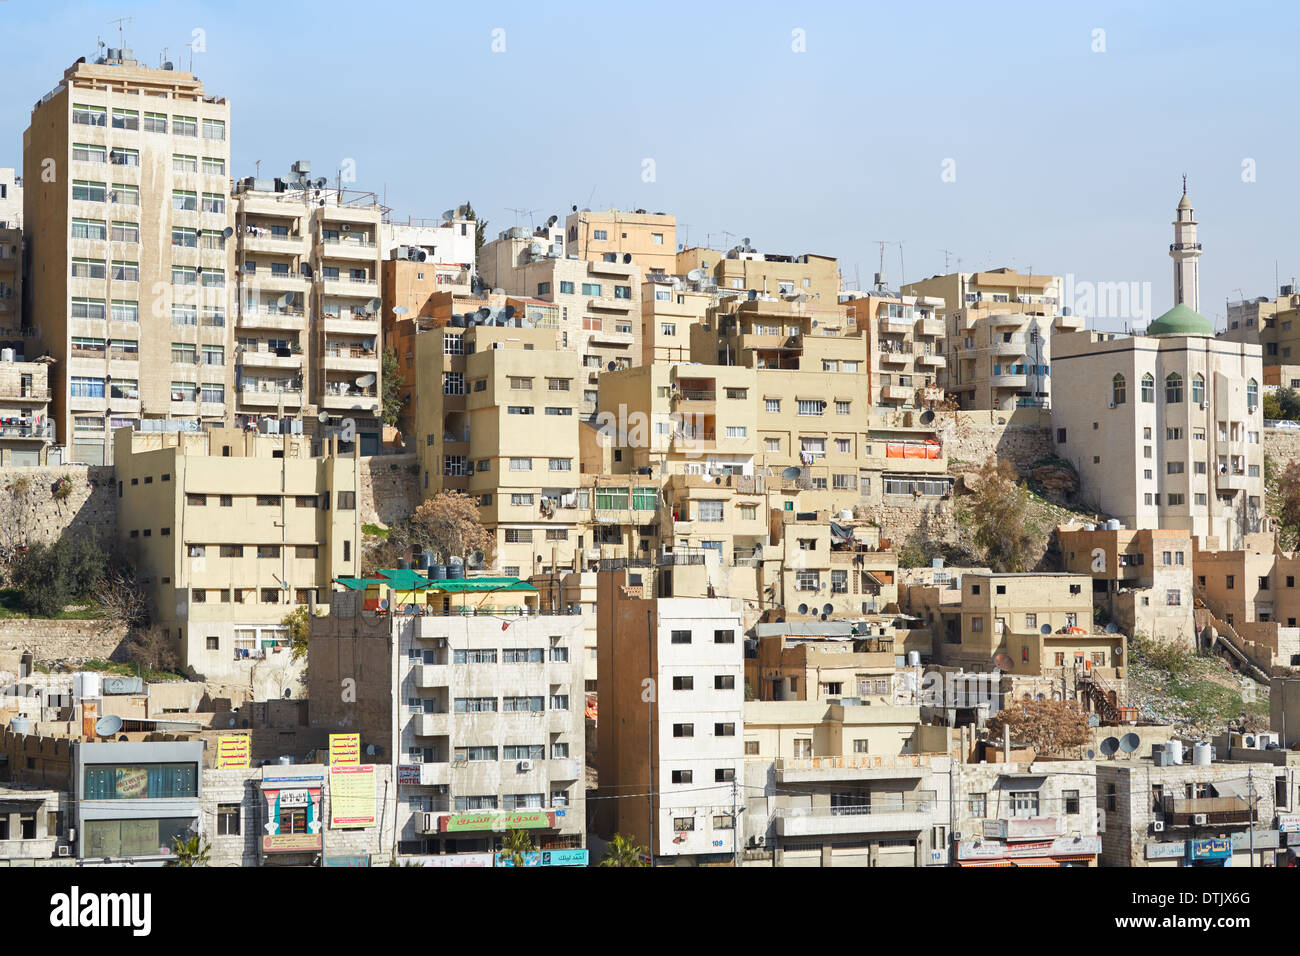 Amman city view of buildings in the middle east Stock Photo